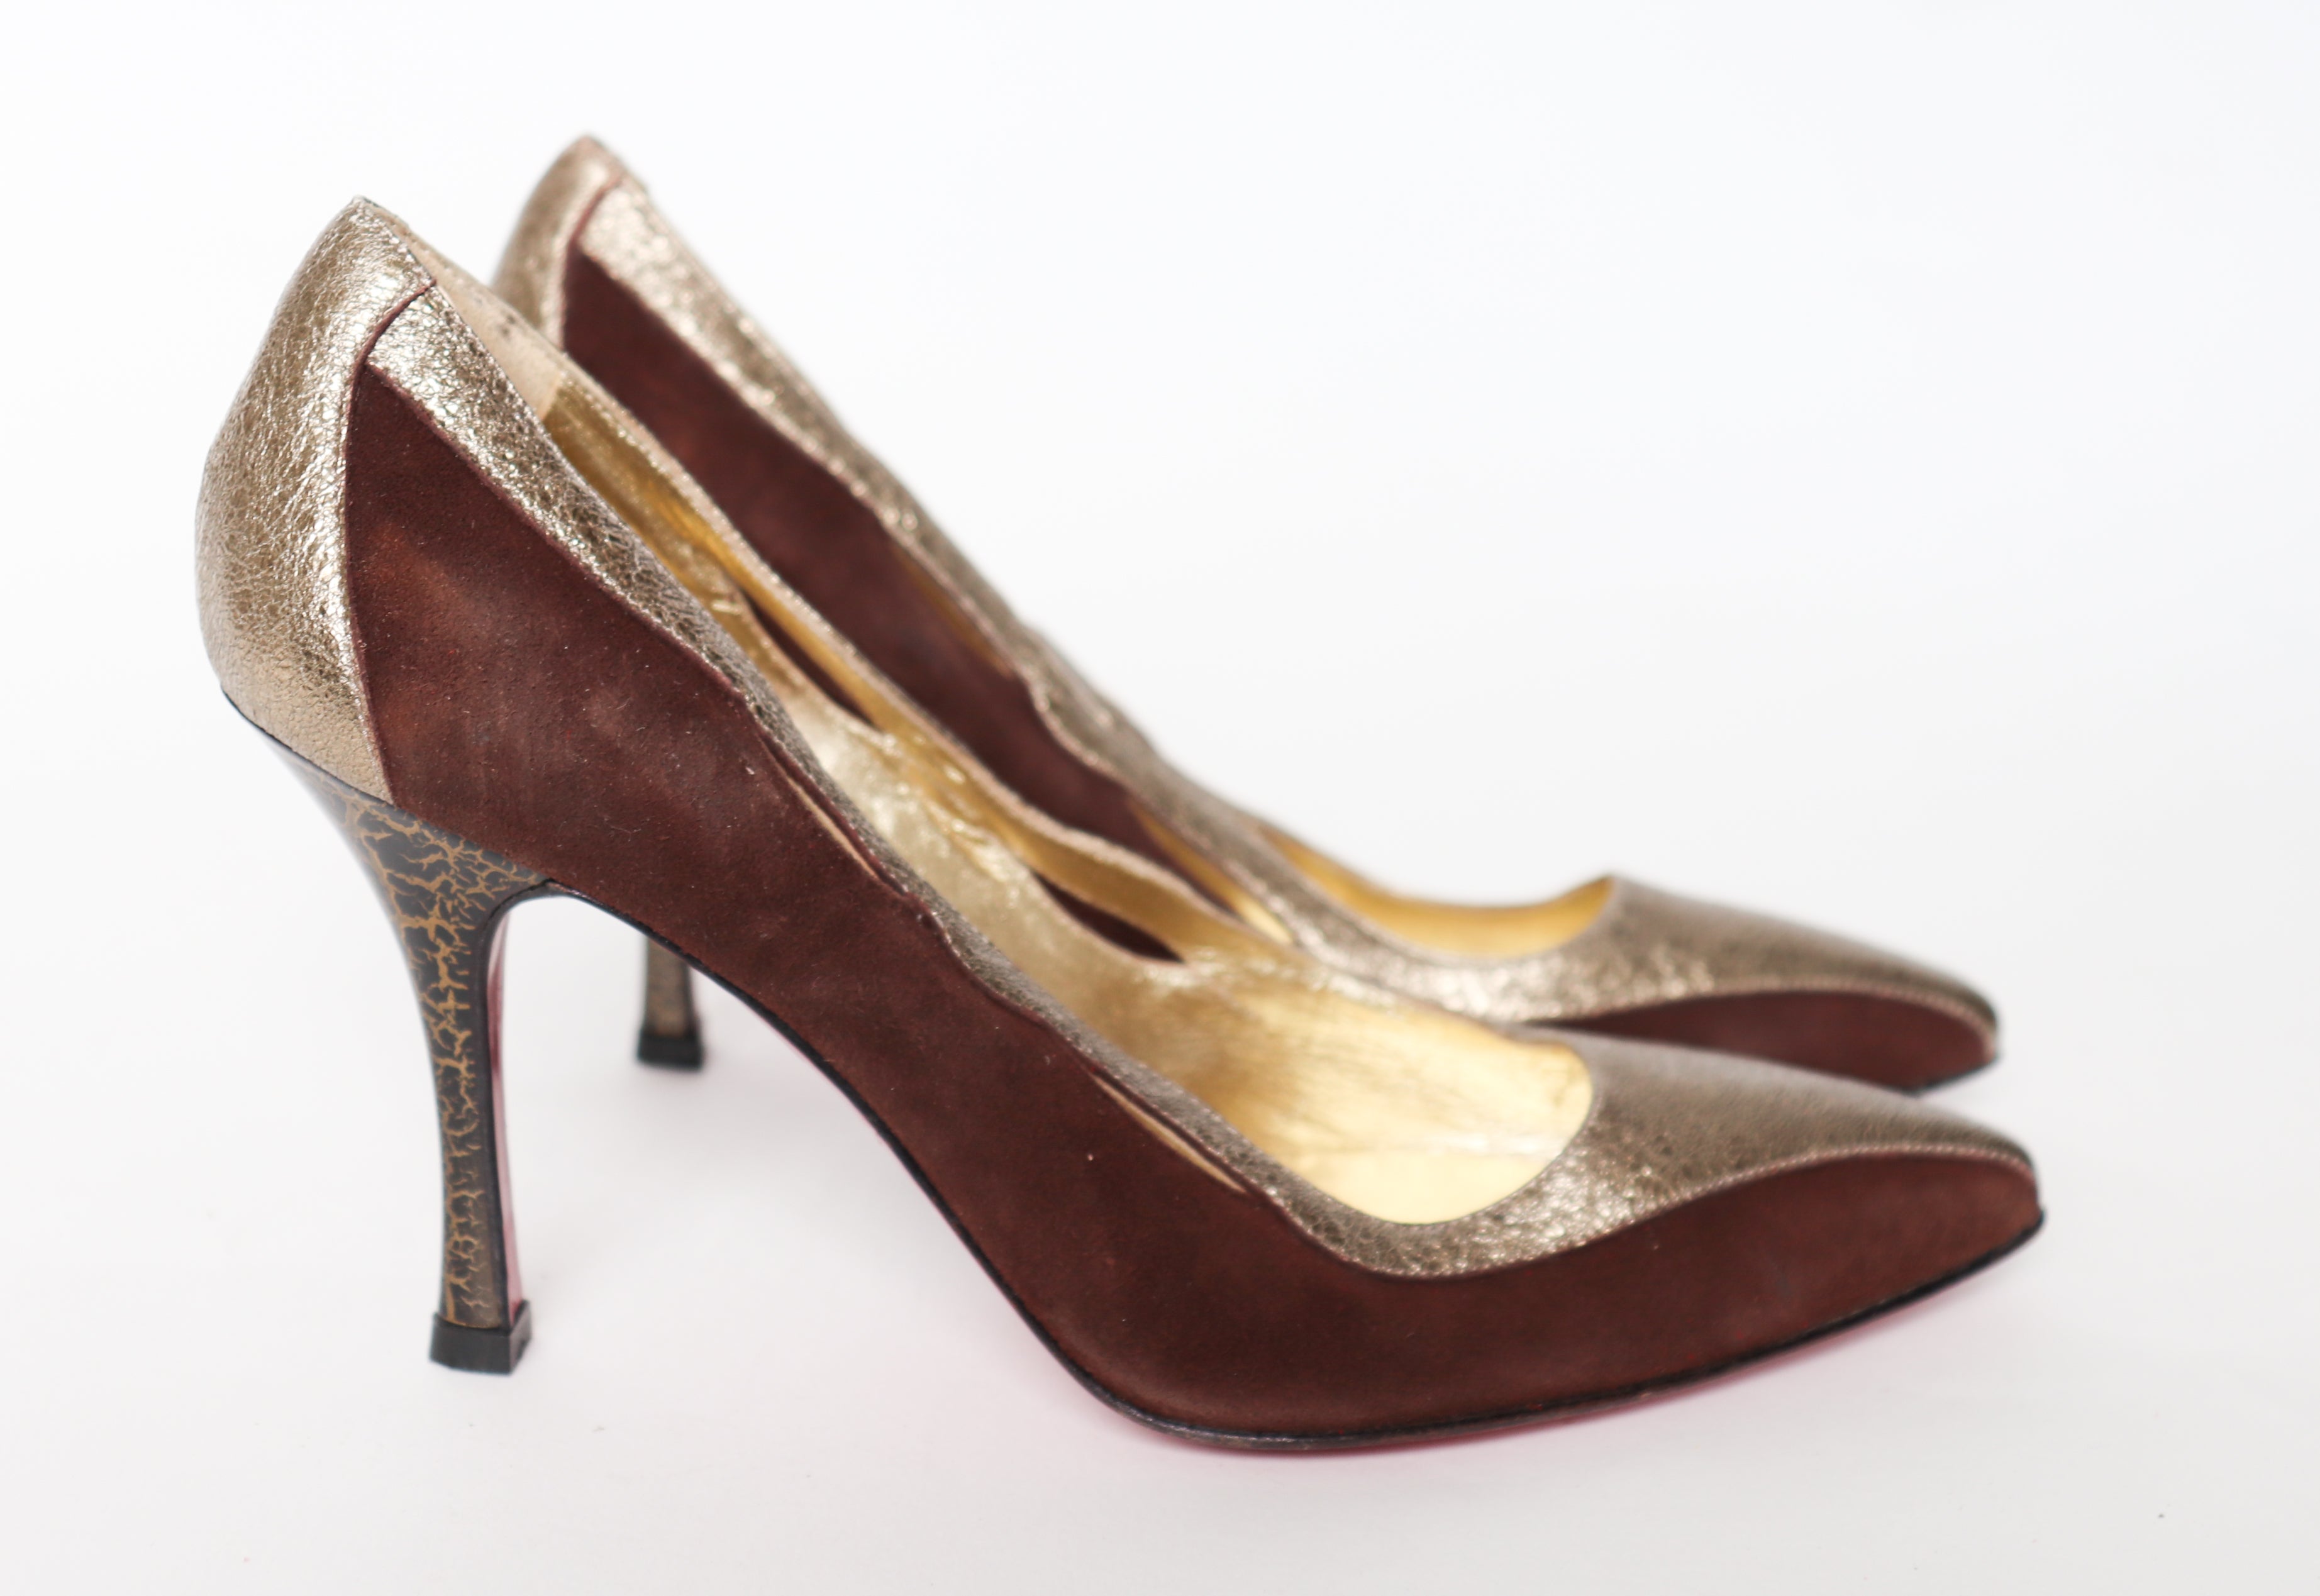 Rizieri Heels / Court Shoes - Gold Leather - 38 / UK 5